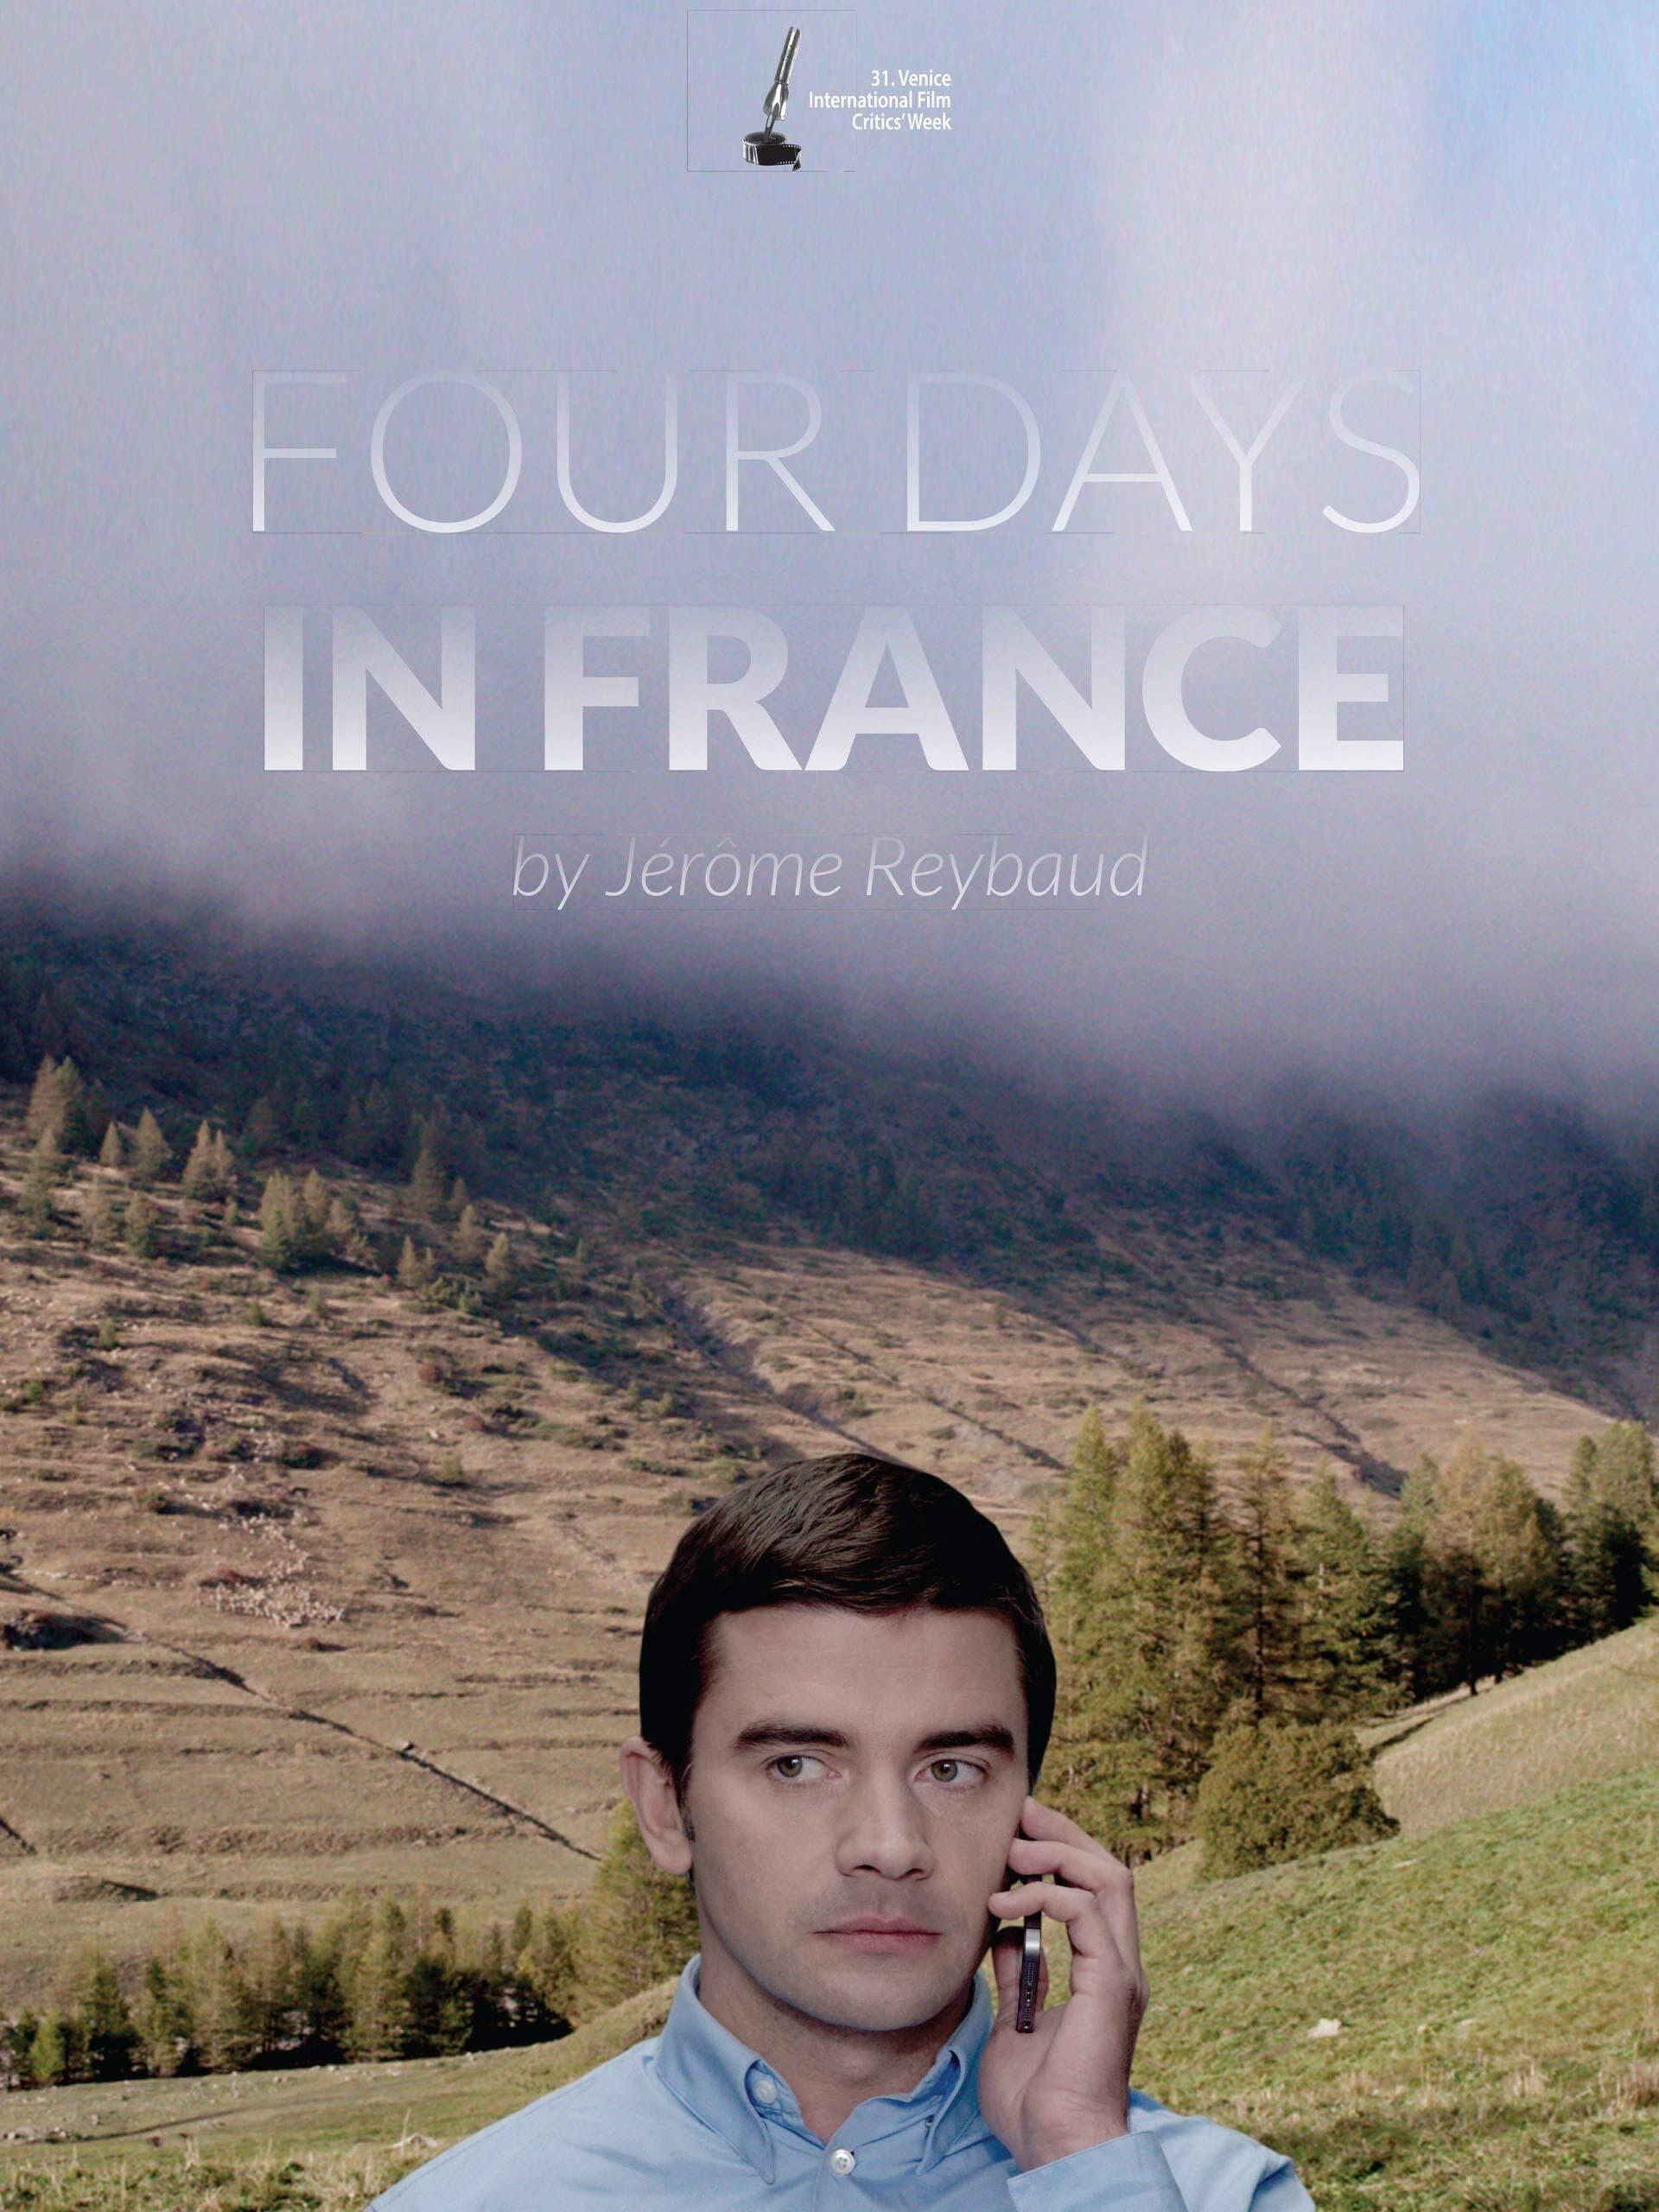 4 Days in France poster